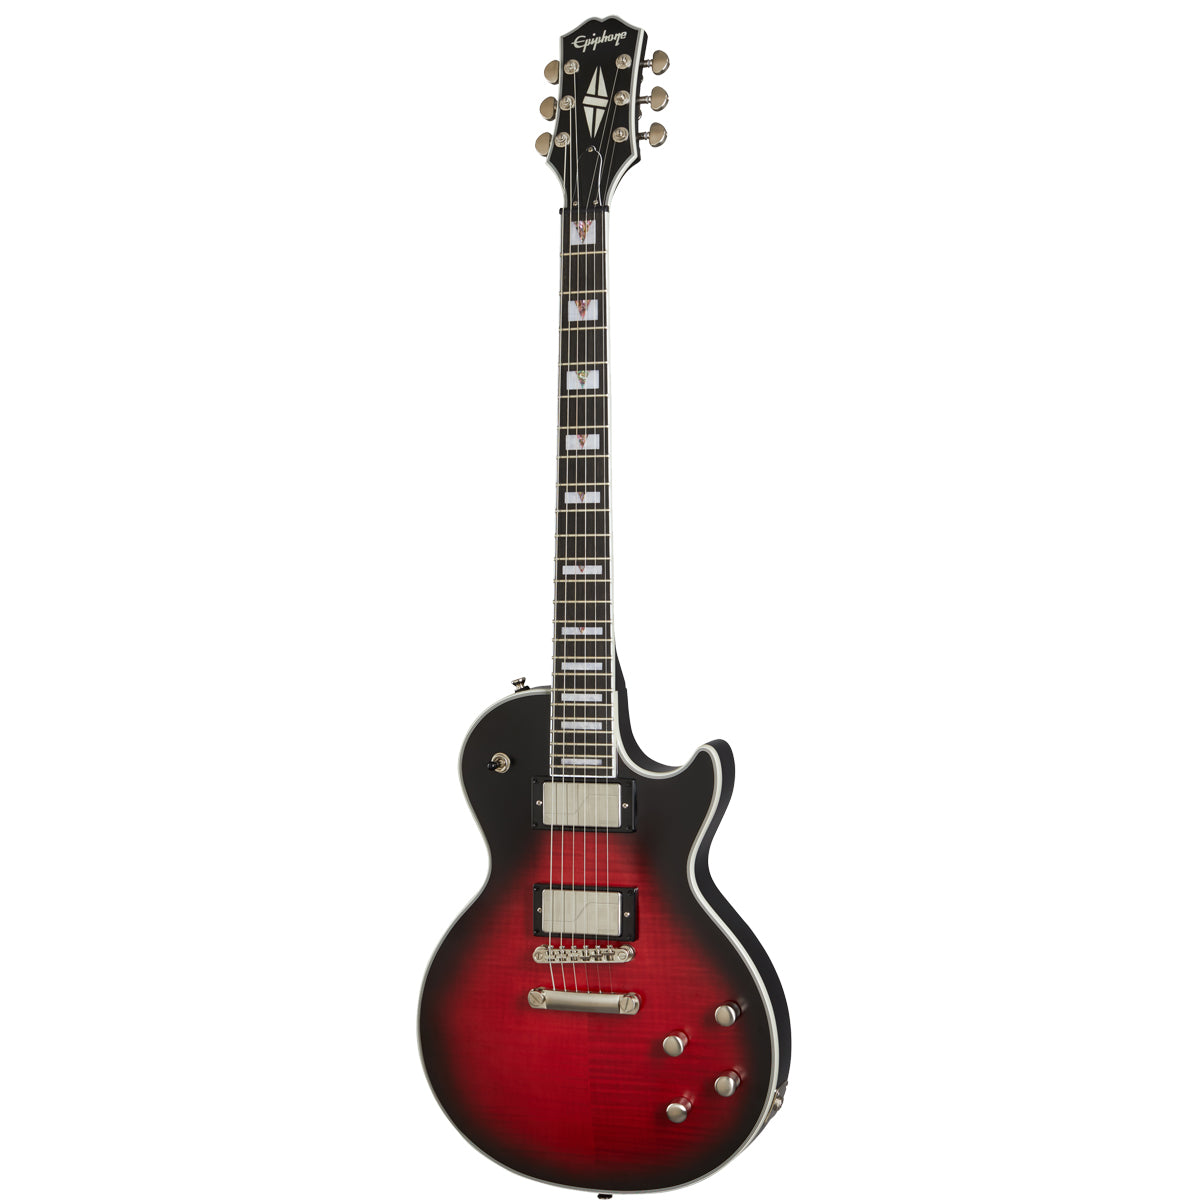 Epiphone Prophecy Les Paul LP Electric Guitar Red Tiger - EILYRTABNH1